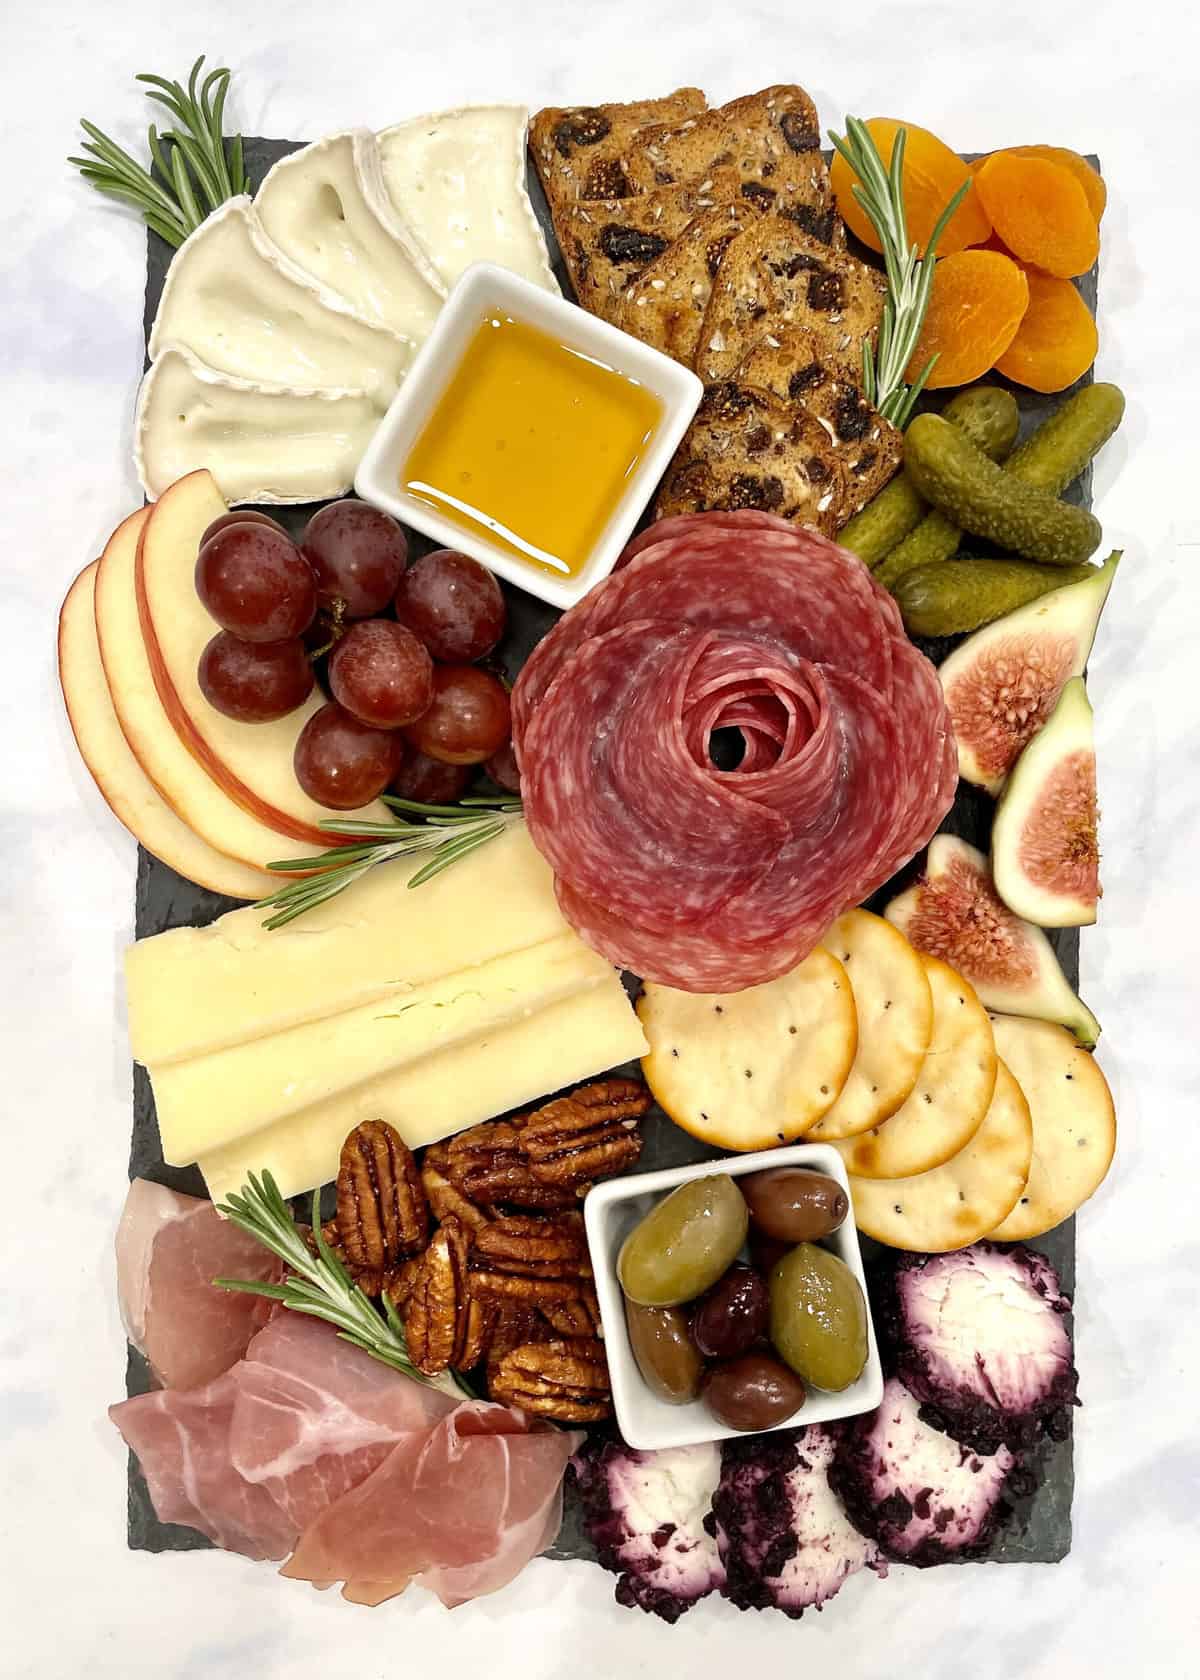 Trader Joe's Mini Cheese and Charcuterie Board by The BakerMama